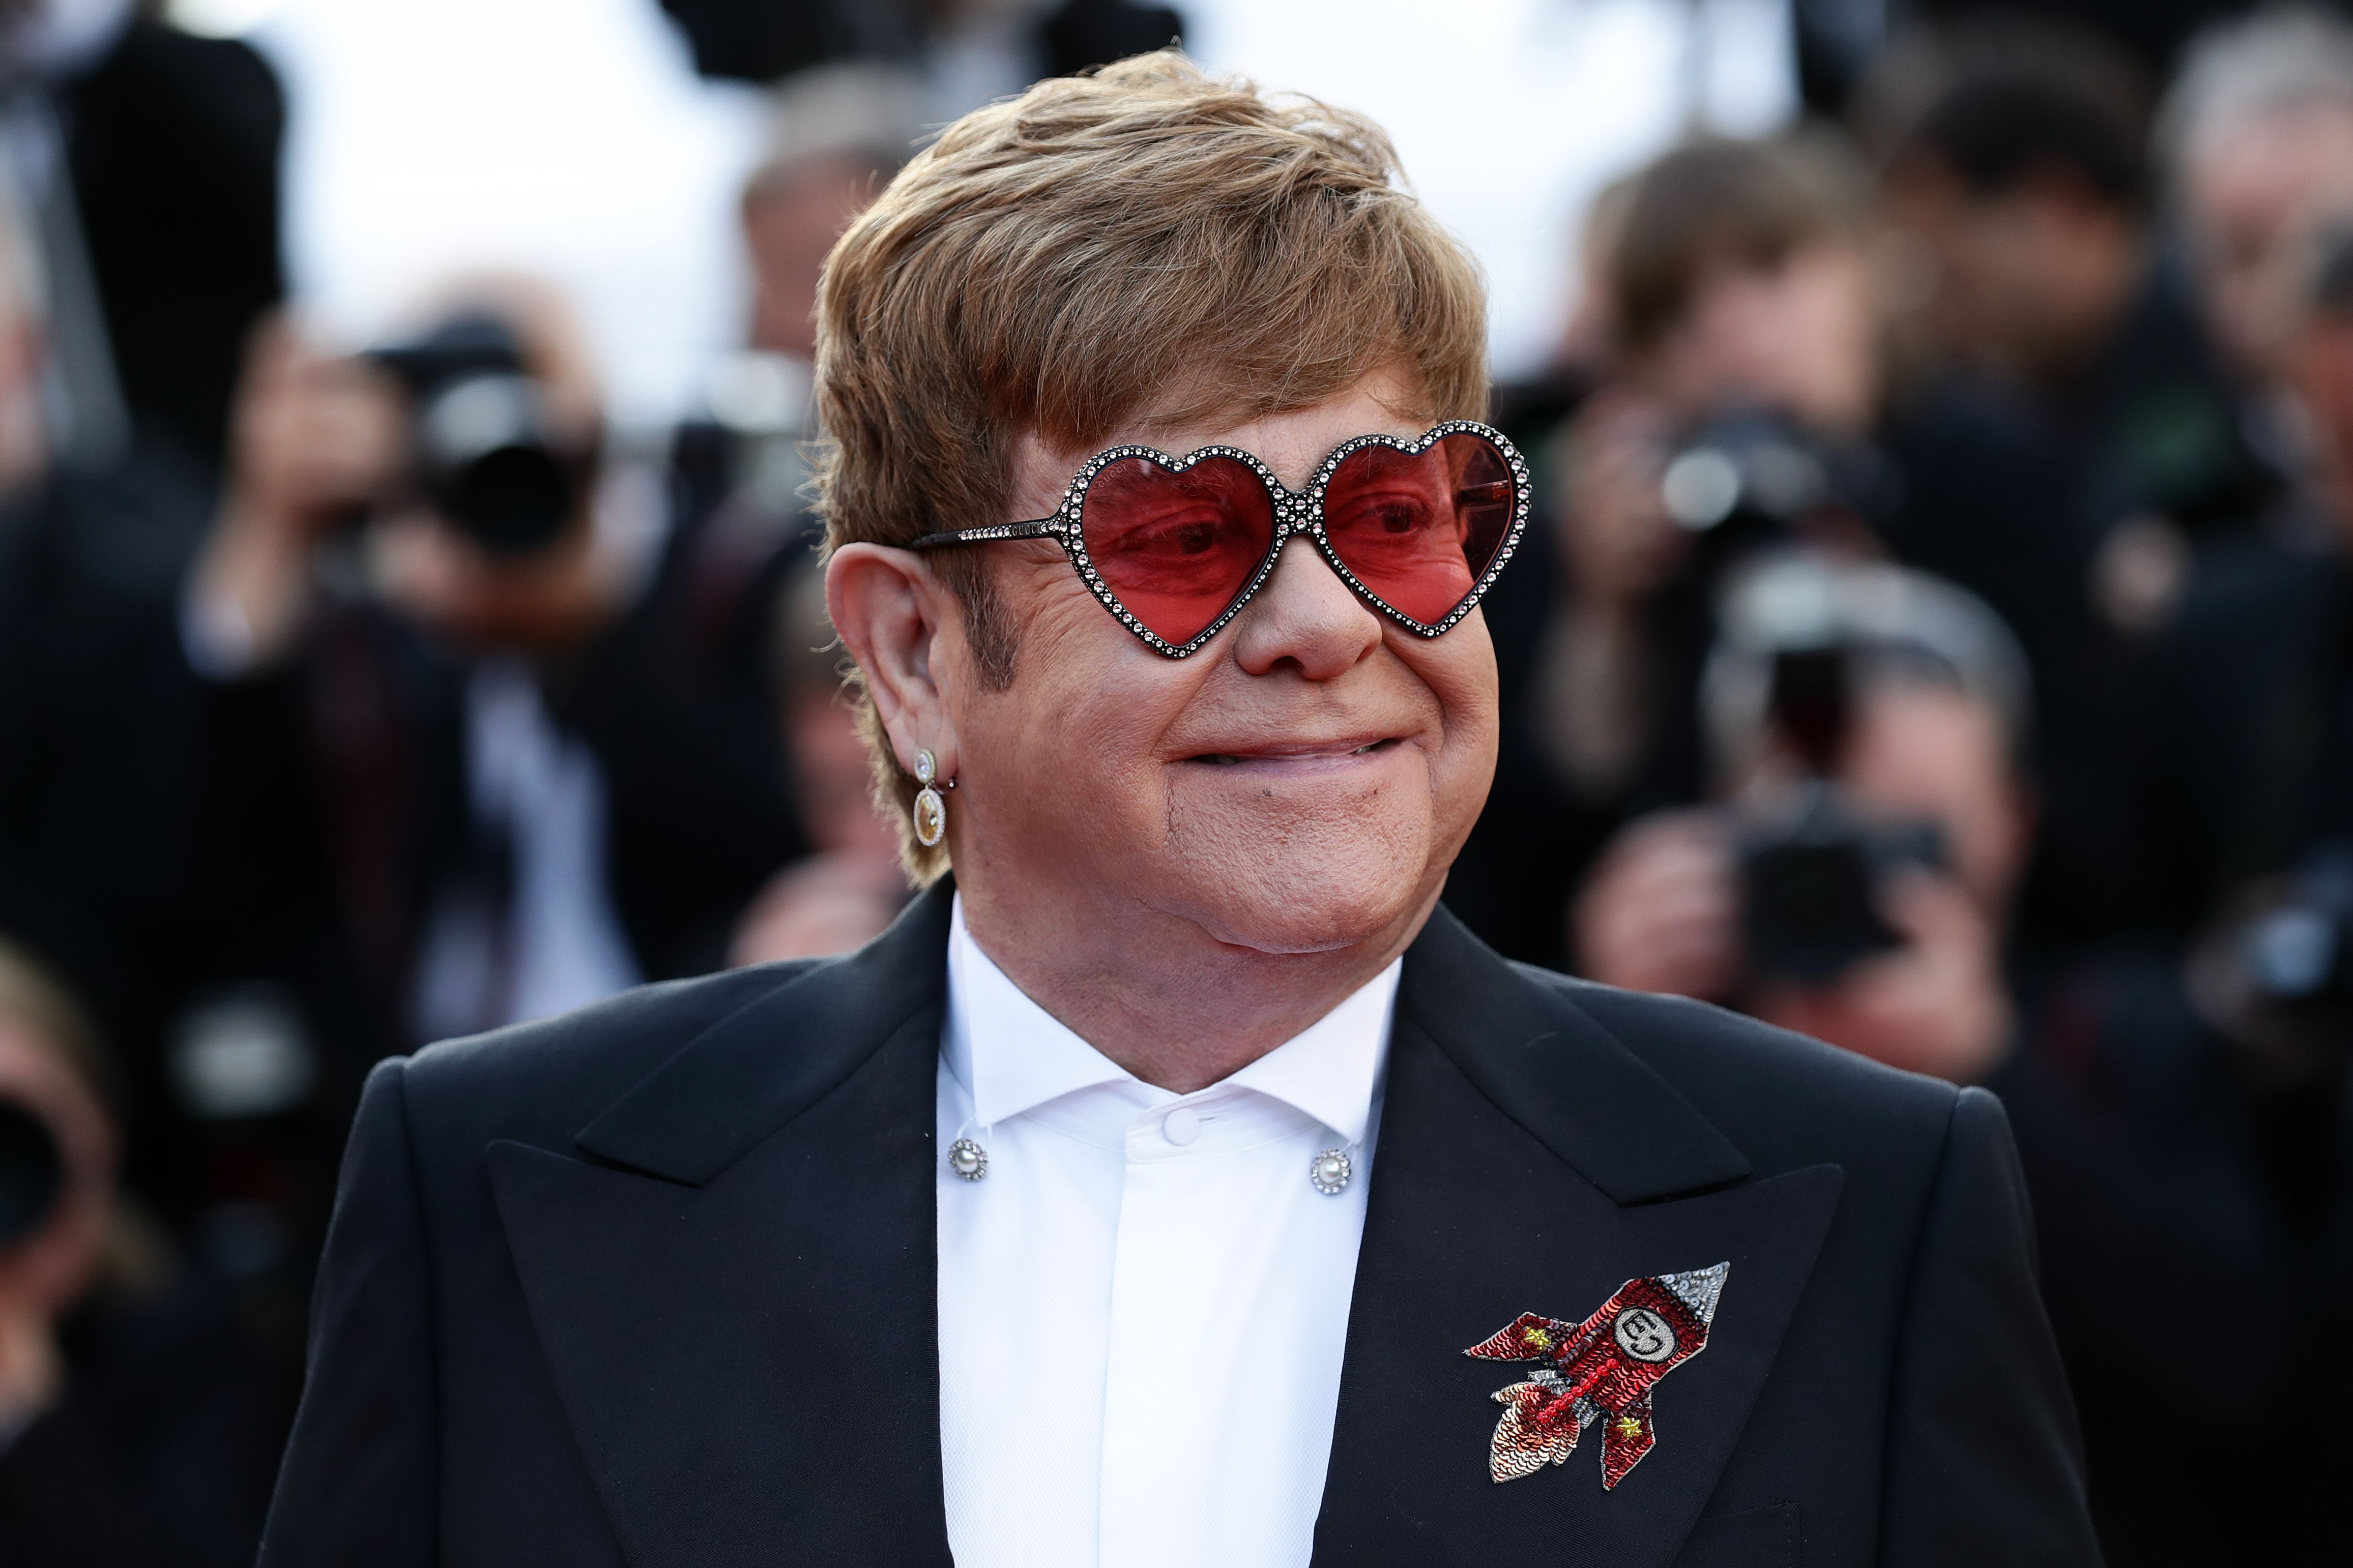 Sir Elton John at the screening of "Rocketman" during the 72nd annual Cannes Film Festival in Cannes, France | Photo: Vittorio Zunino Celotto/Getty Images for Paramount Pictures